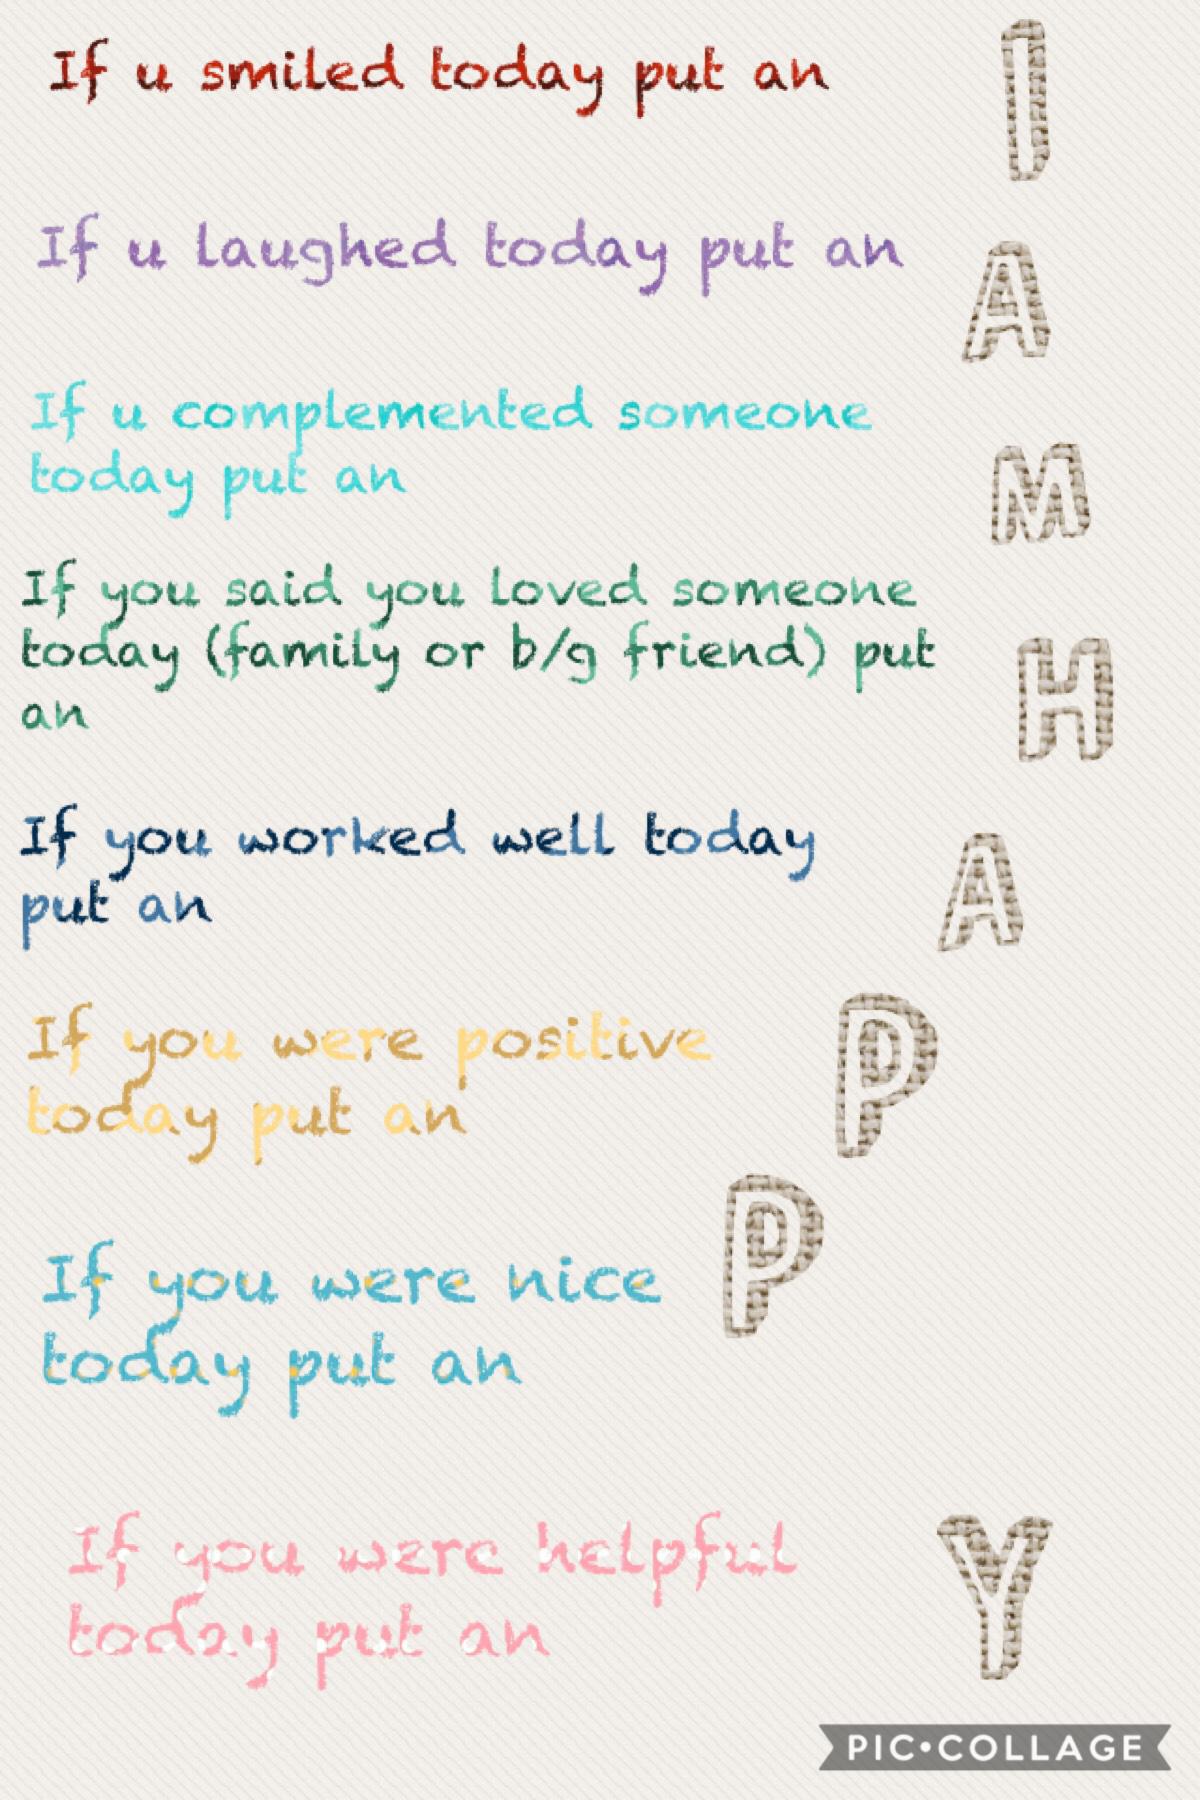                        Tap plz❤️
How this works: If you were any of these things today put down the letter next to the thing you were today in the comments
If you were honestly all of these things today you will finish with I AM HAPPY 
Plz type how many l